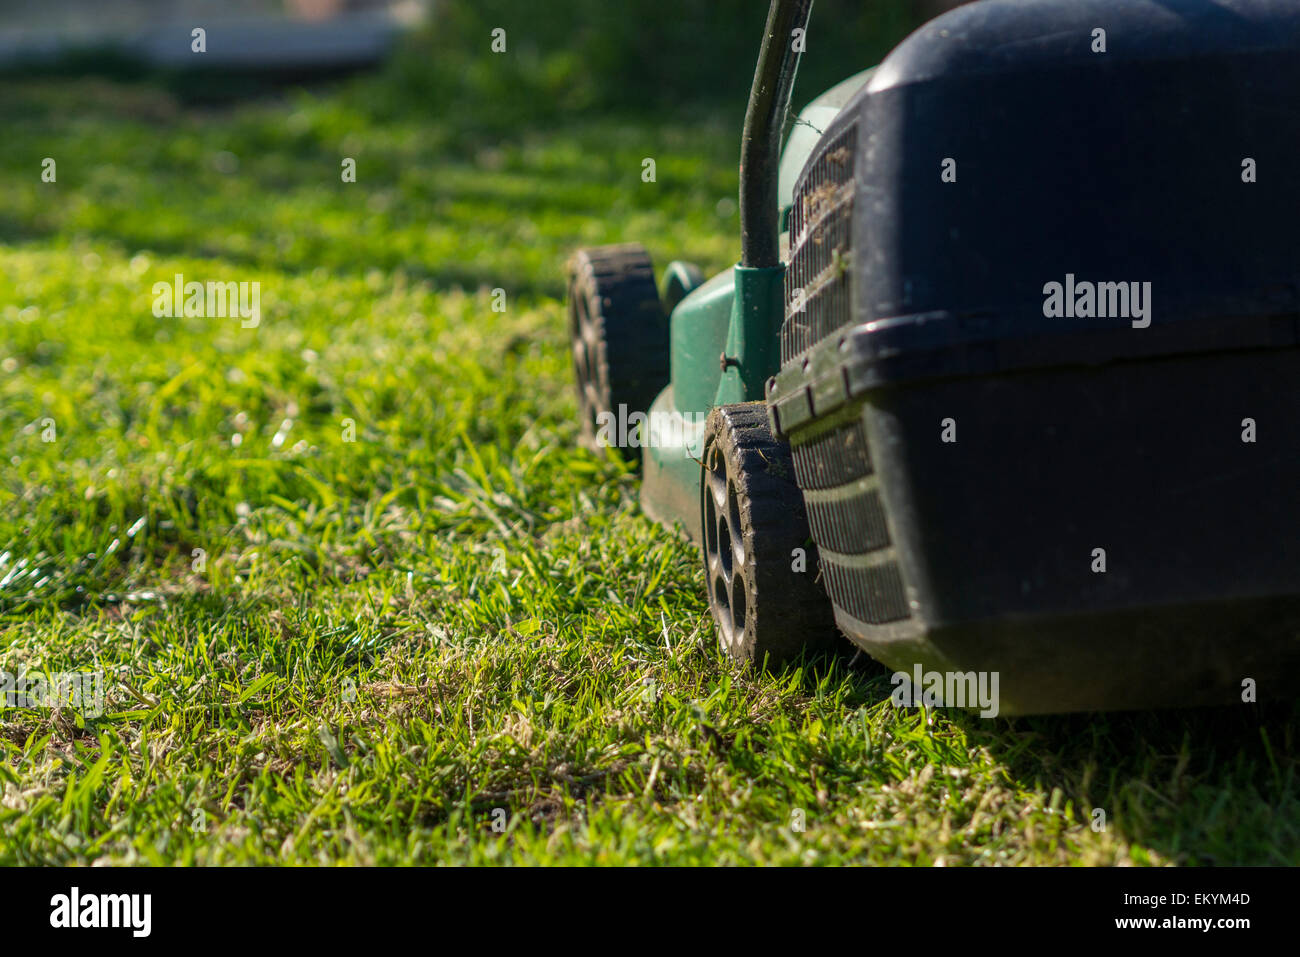 A low shot of a lawnmower cutting the grass. Stock Photo